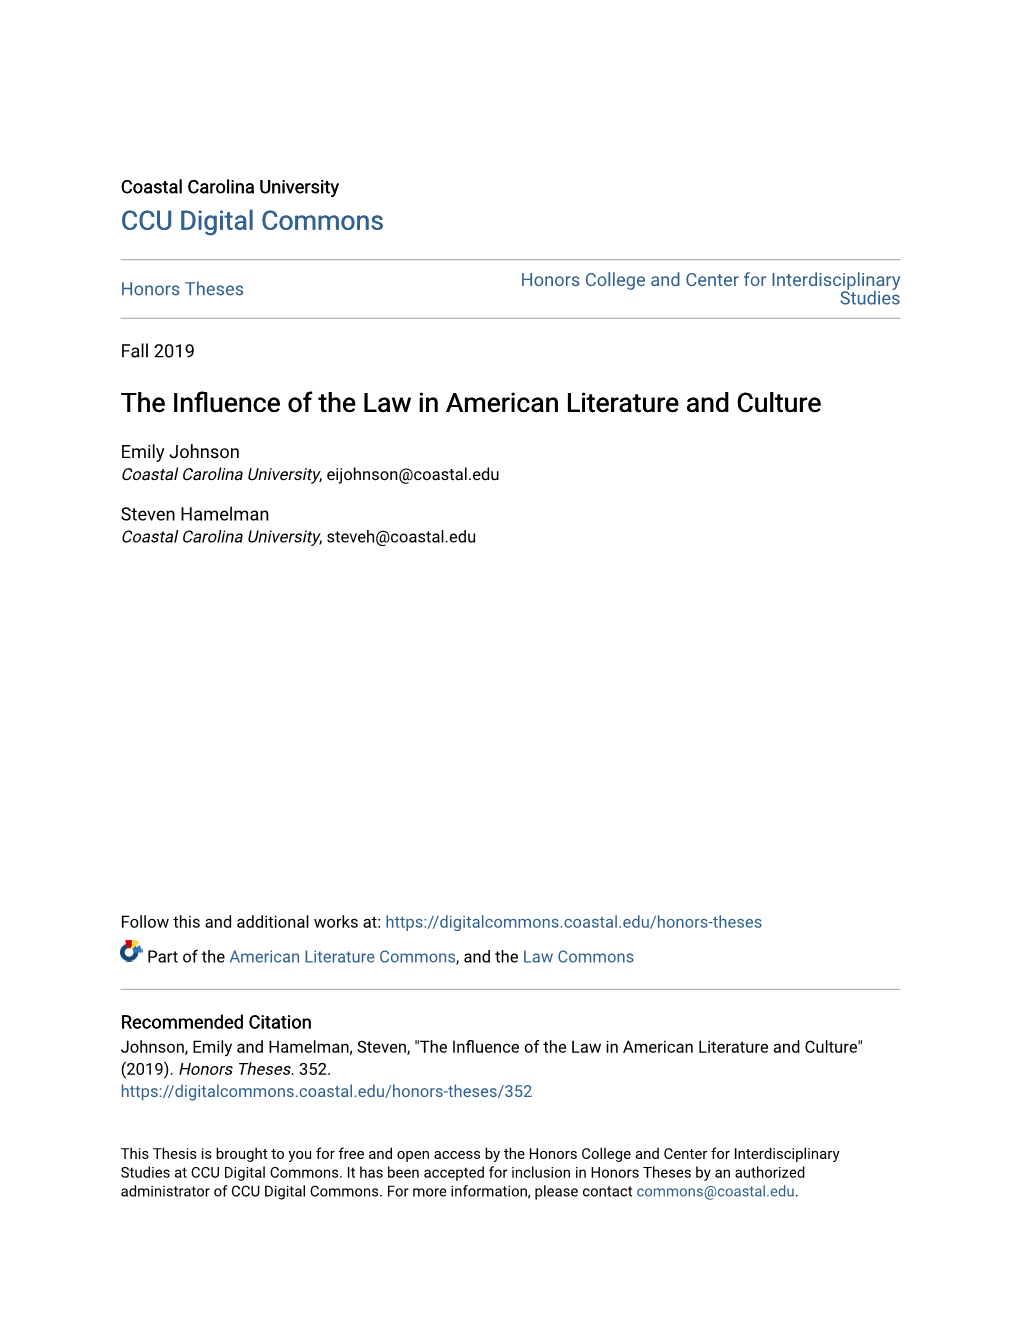 The Influence of the Law in American Literature and Culture